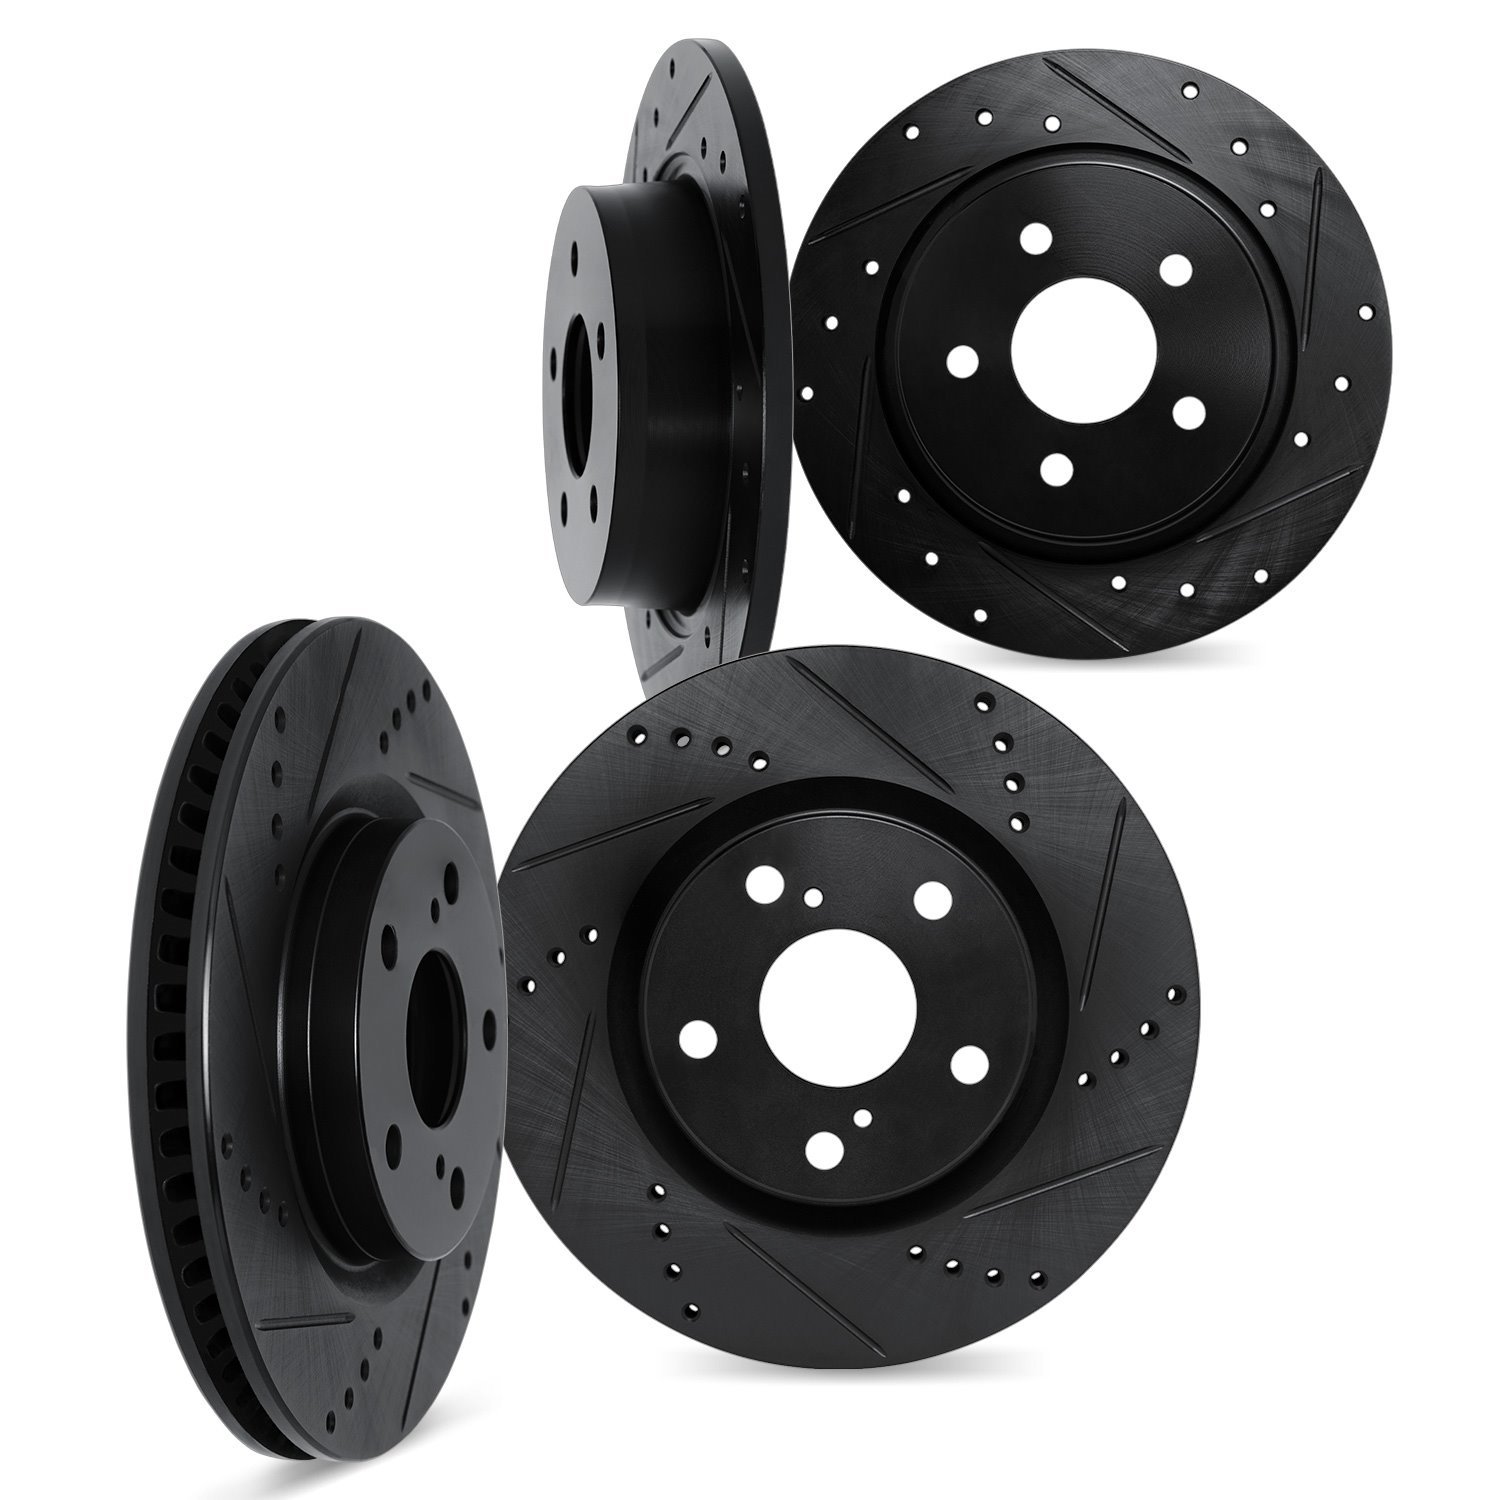 8004-76139 Drilled/Slotted Brake Rotors [Black], Fits Select Lexus/Toyota/Scion, Position: Front and Rear